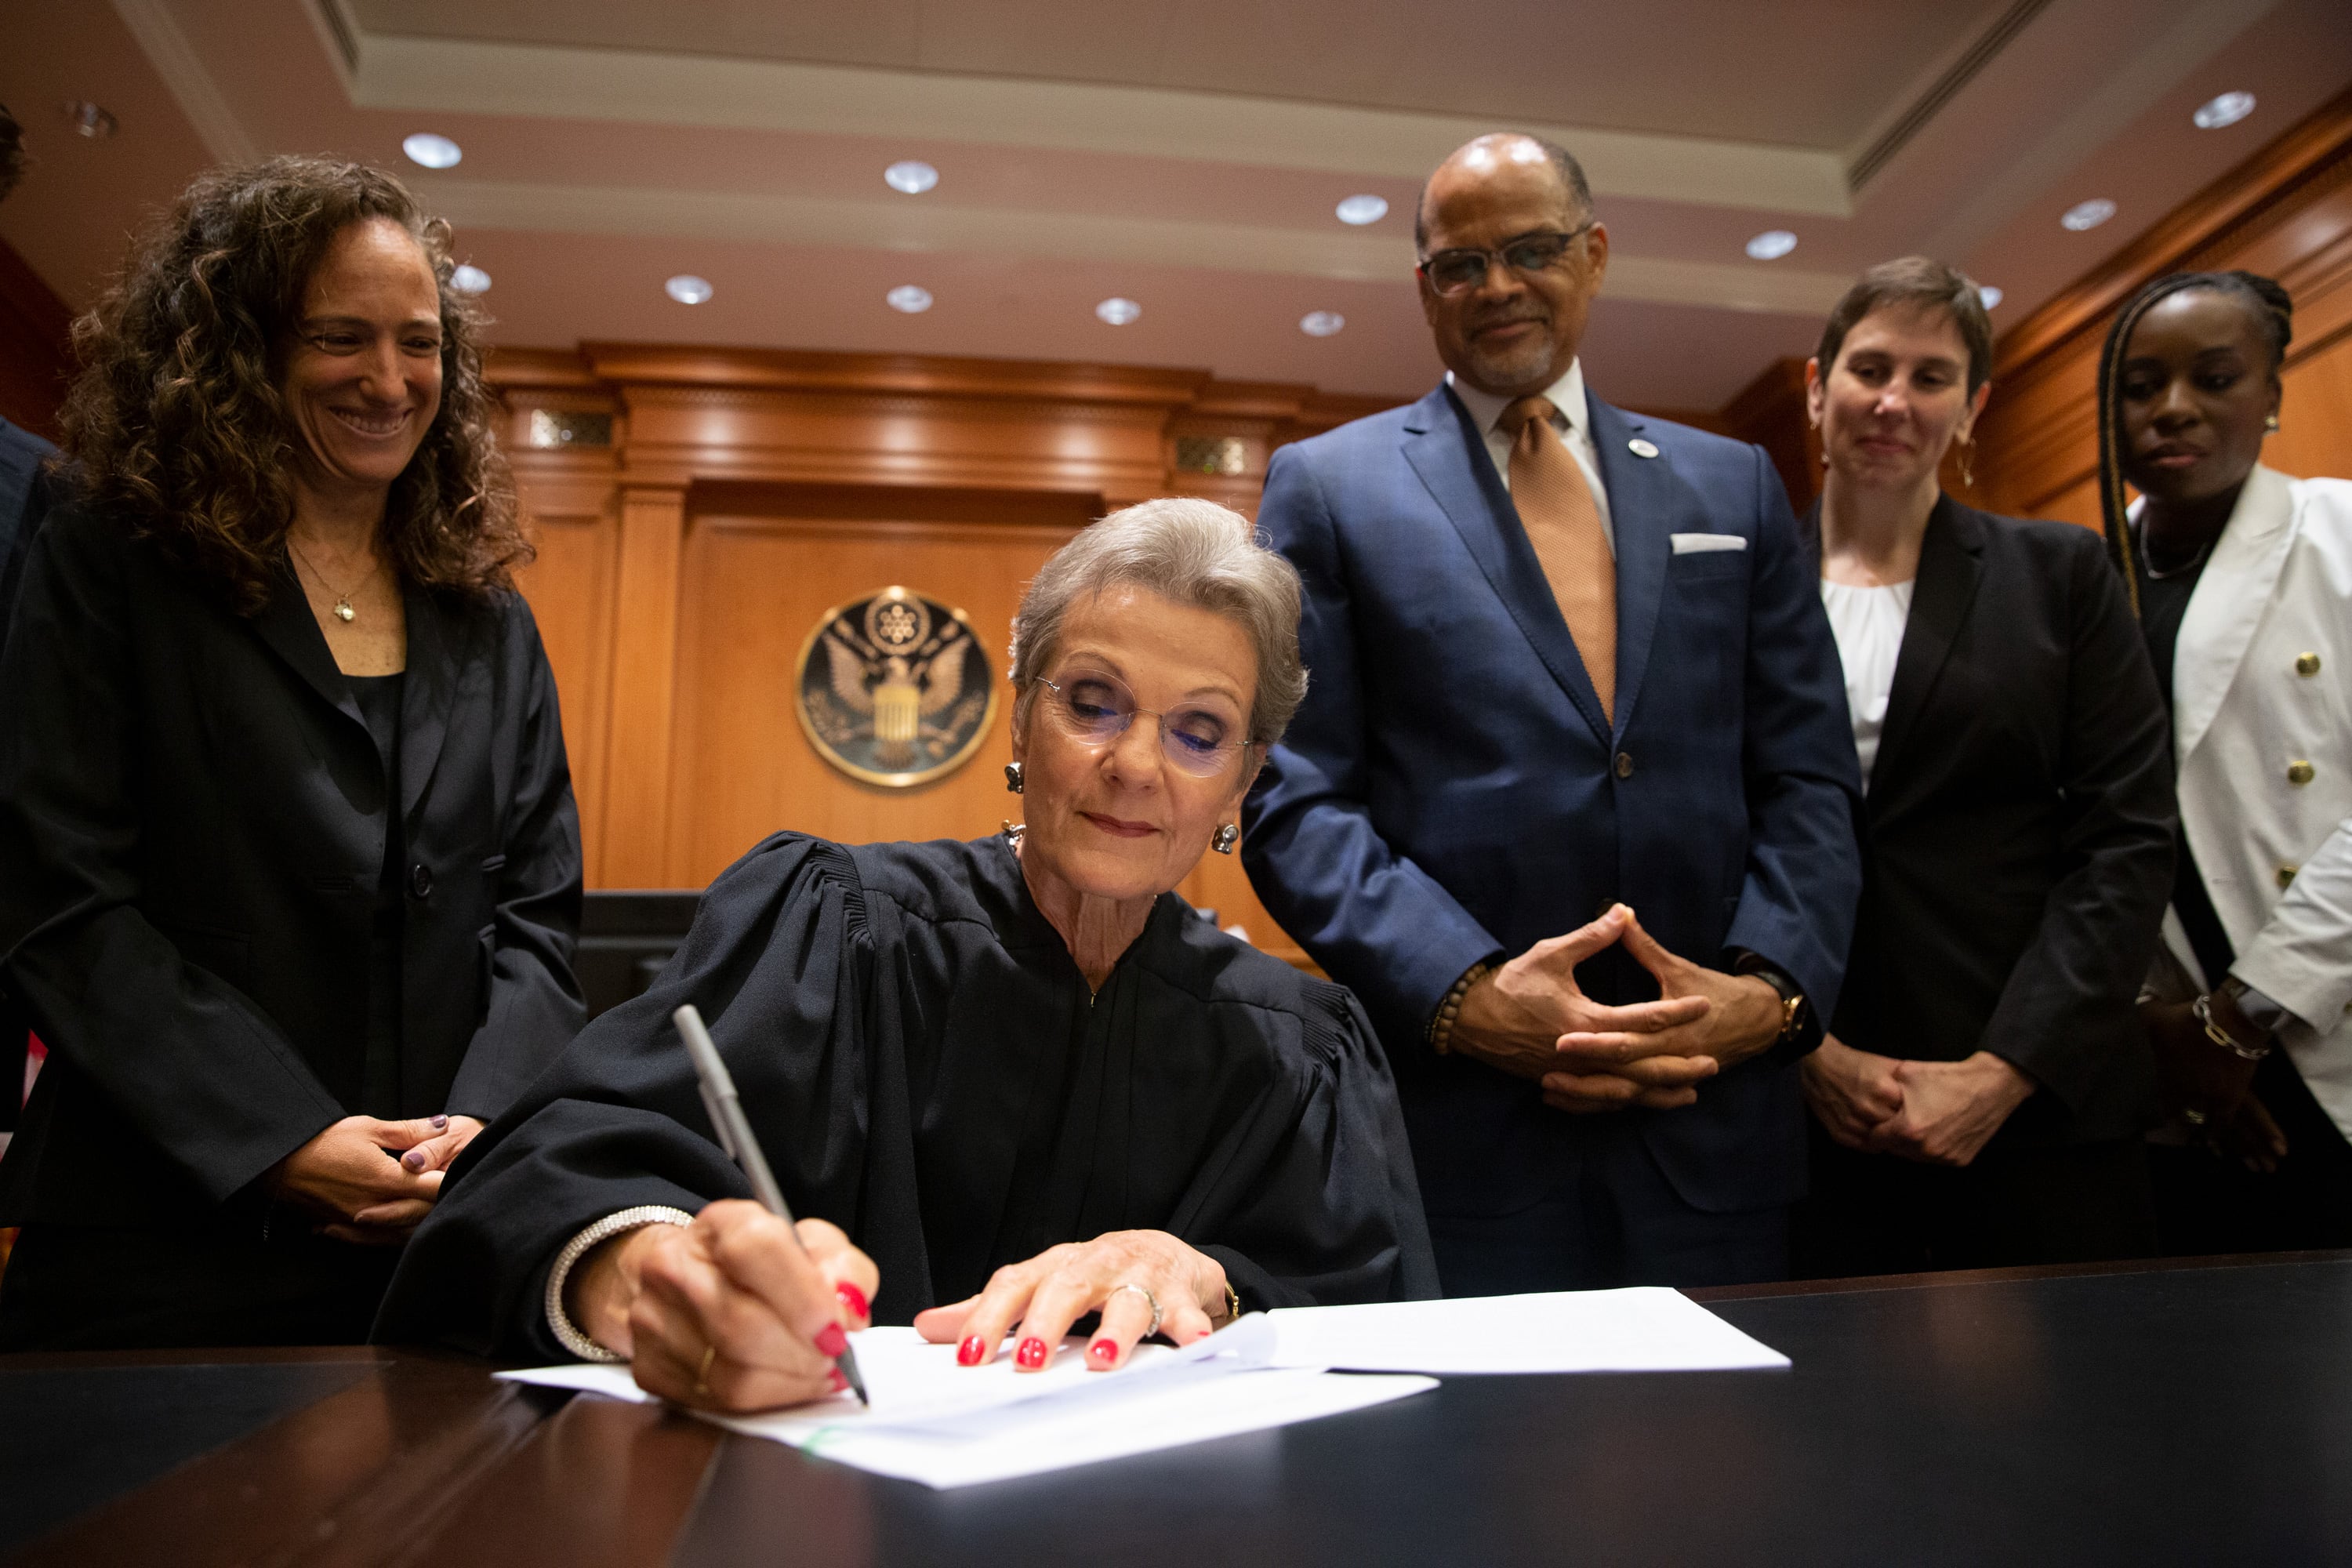 A female judge in robes sits at a table and signs a court order flanked by other officials.